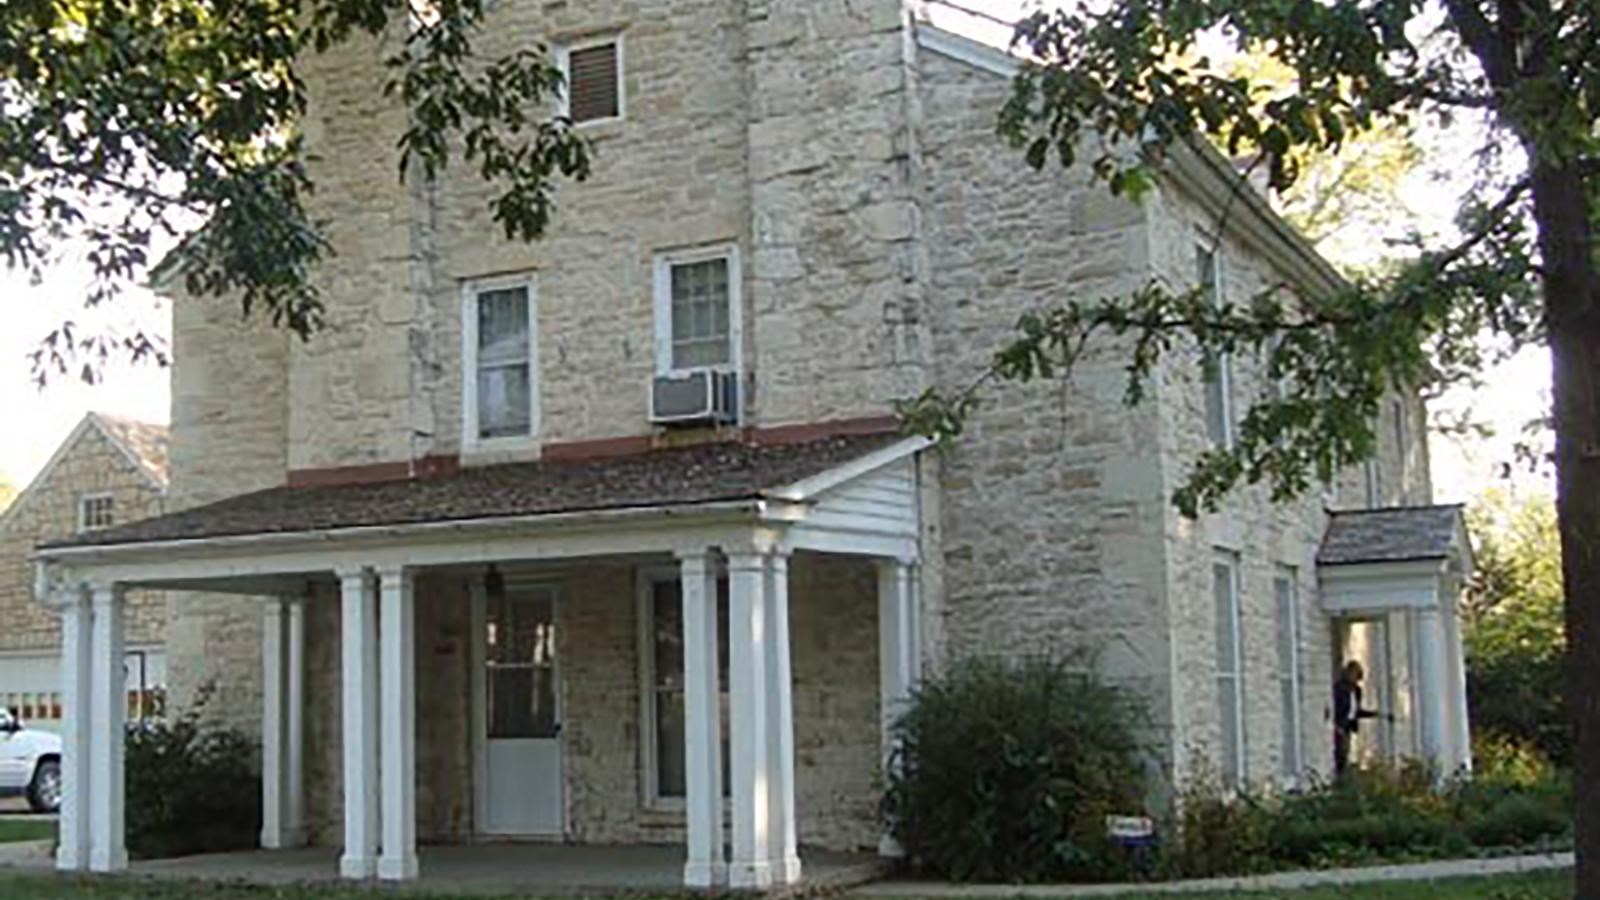 Large, white stone historic house with a covered porch.